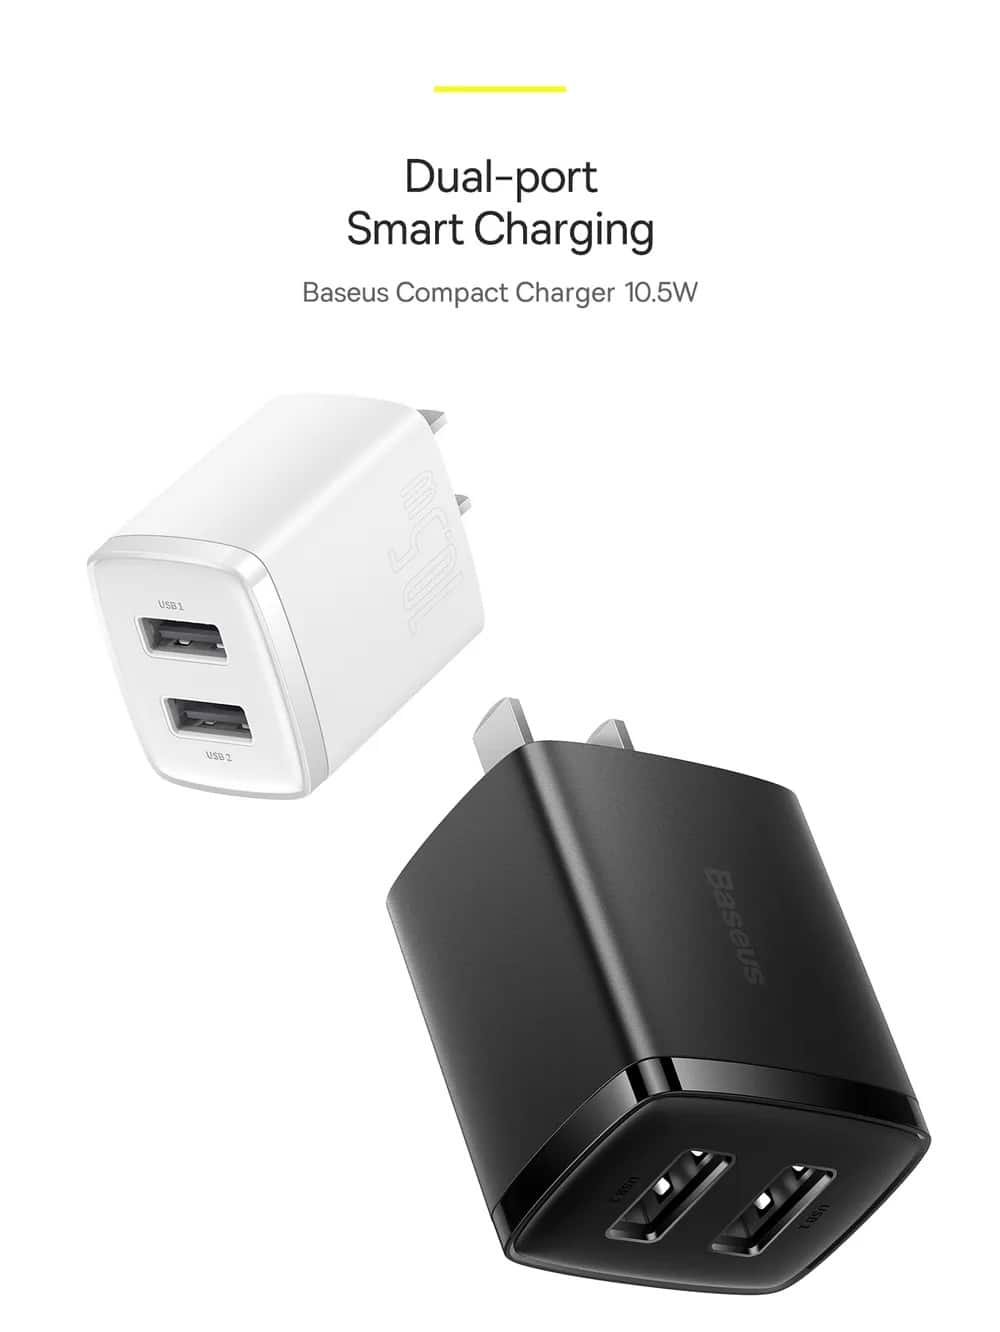 Compact Charger 10.5w 8